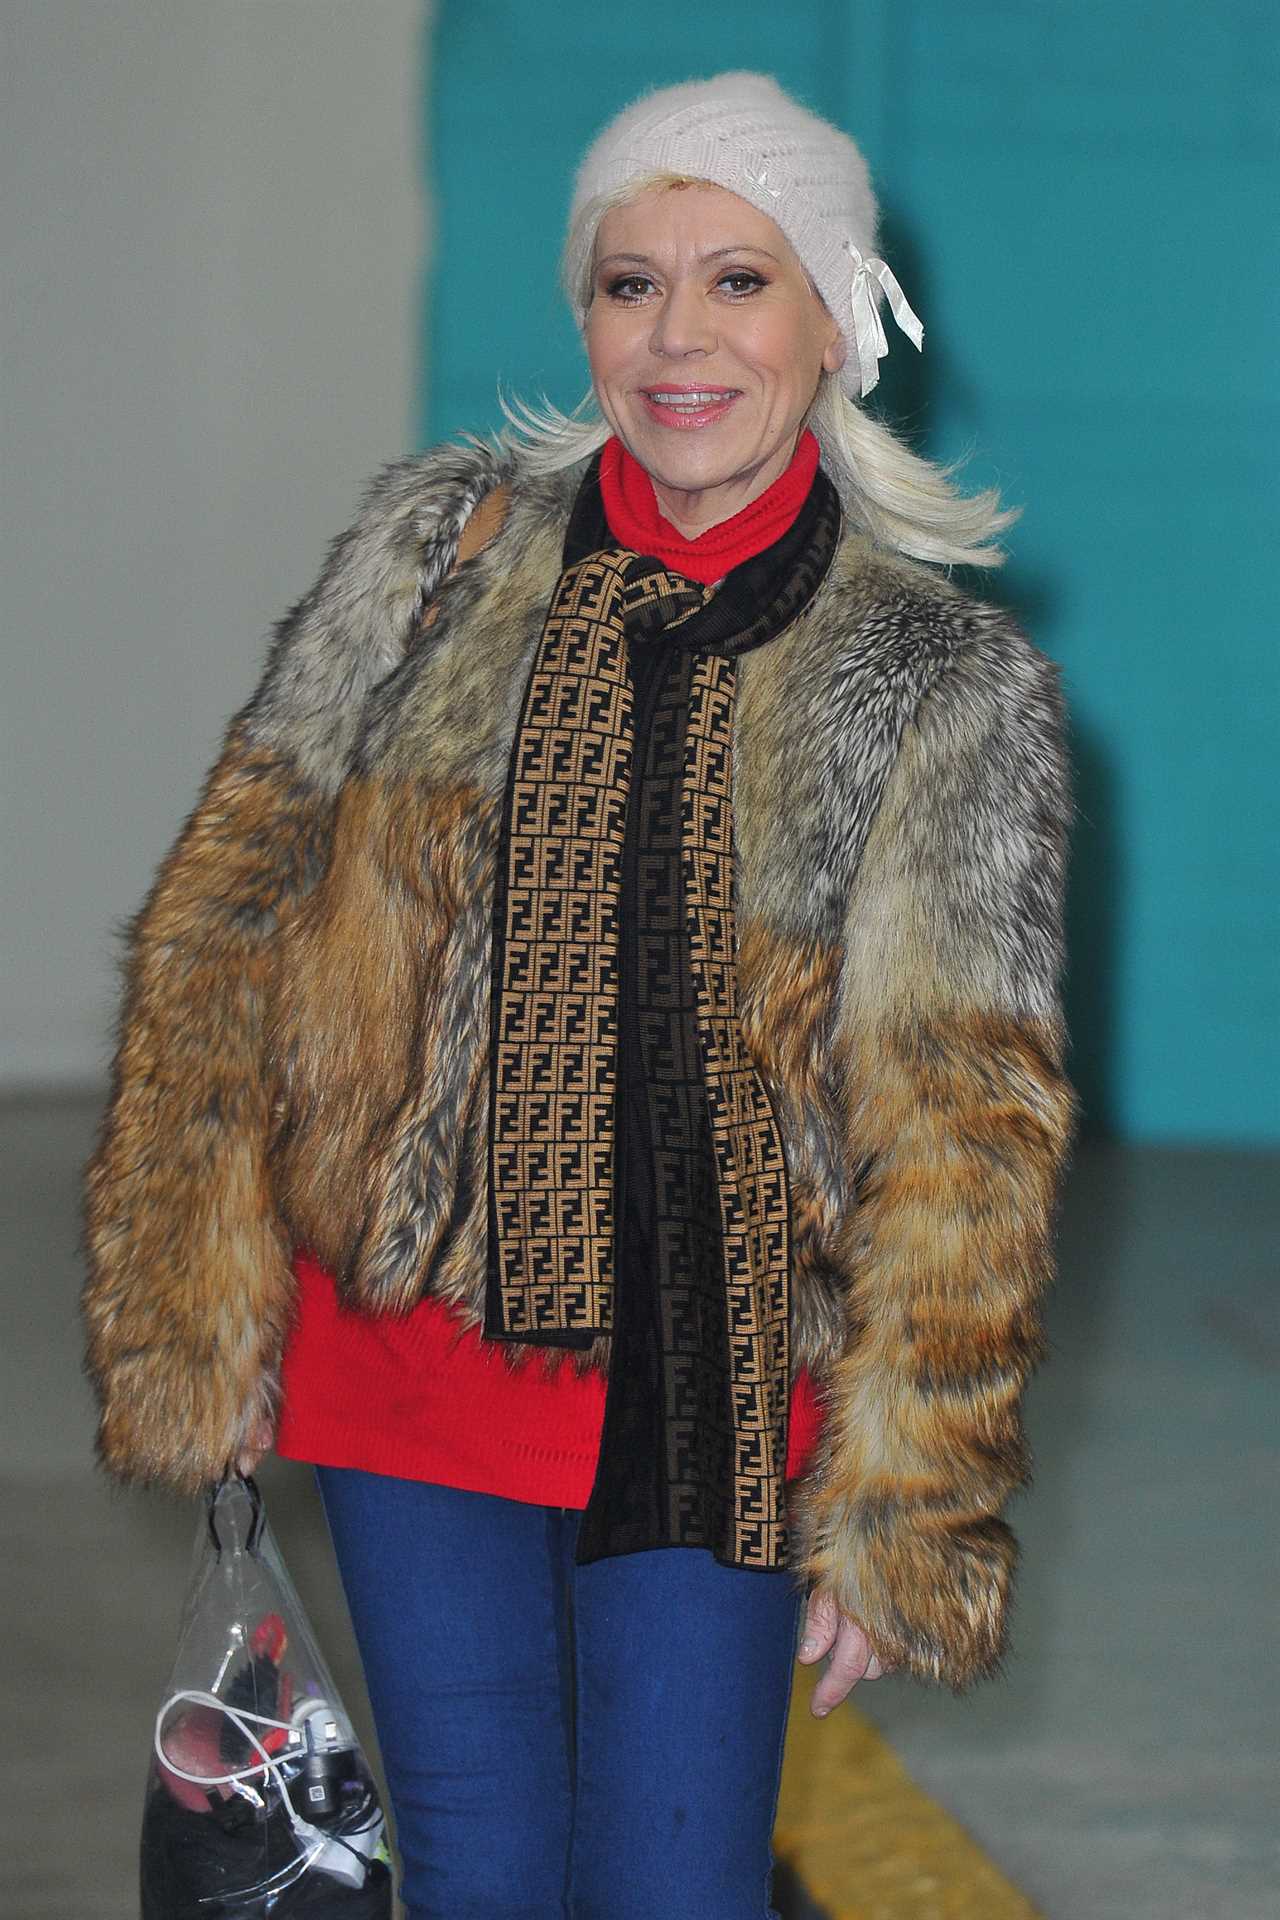 I might be 60 but I now look 40 after losing 12st and quitting booze, says soap legend Tina Malone